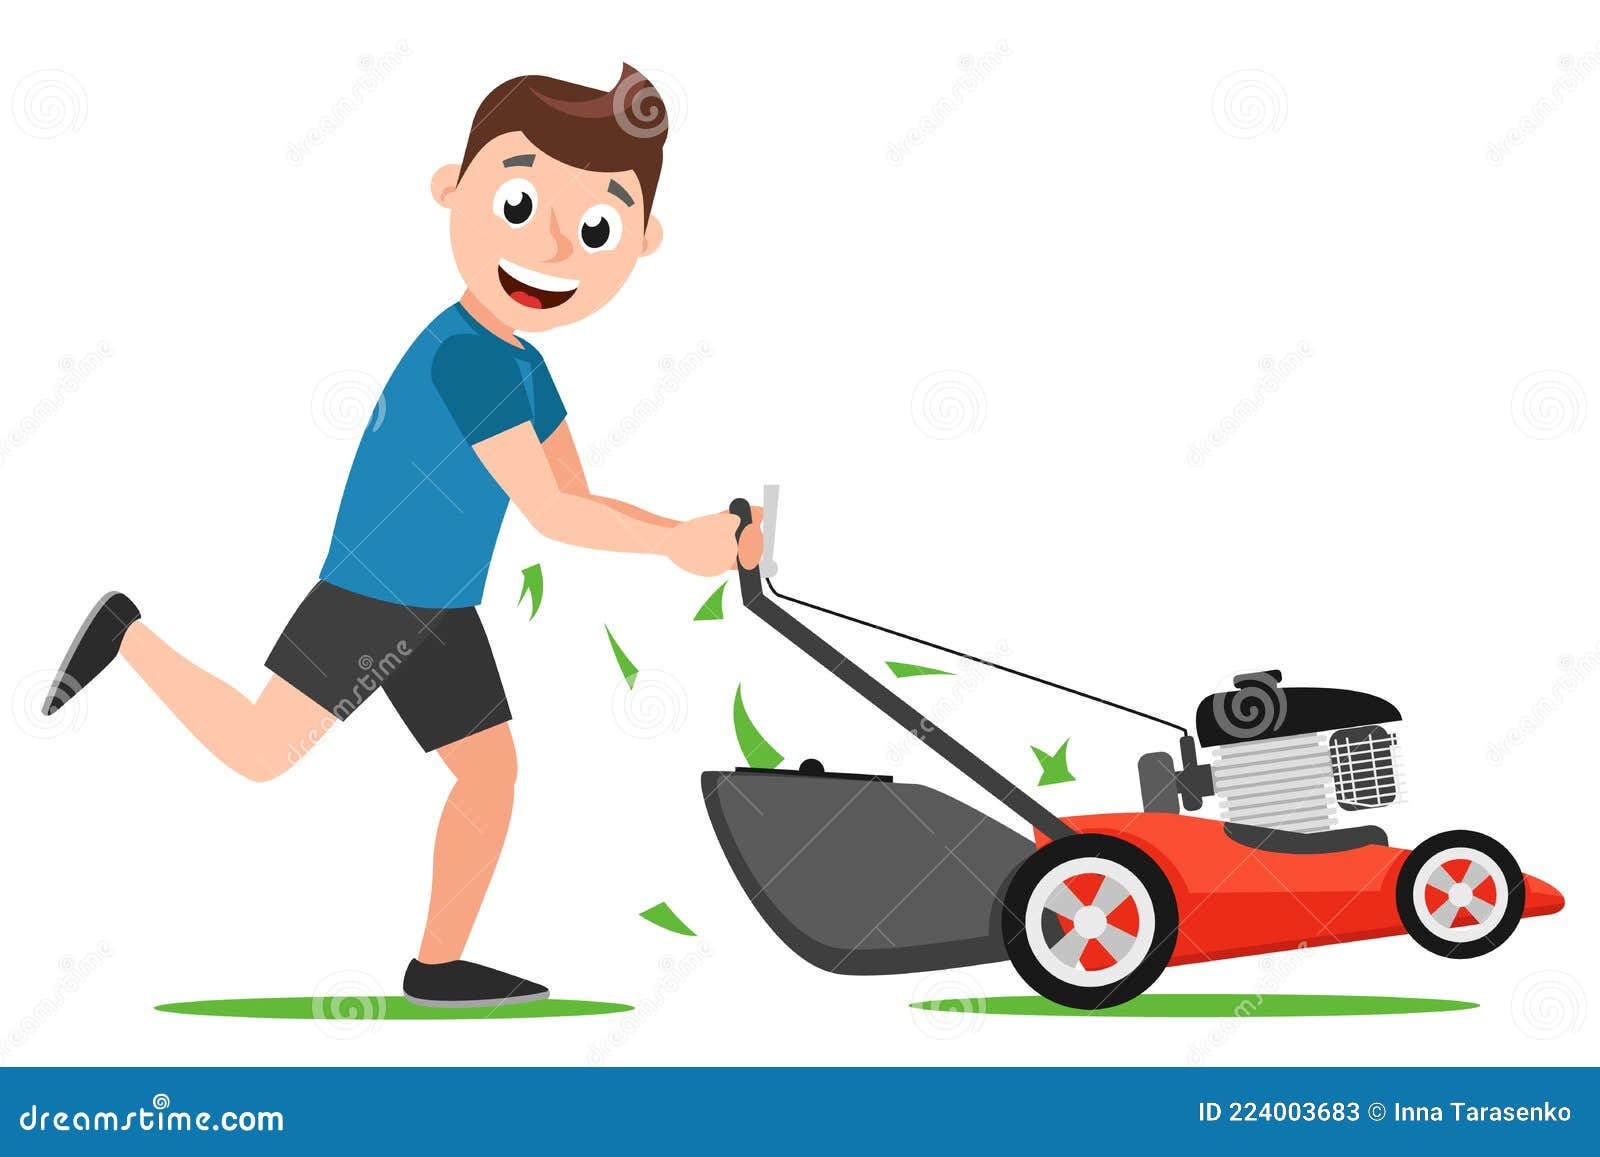 man runs with a lawn mower on a white background. lawn mowing